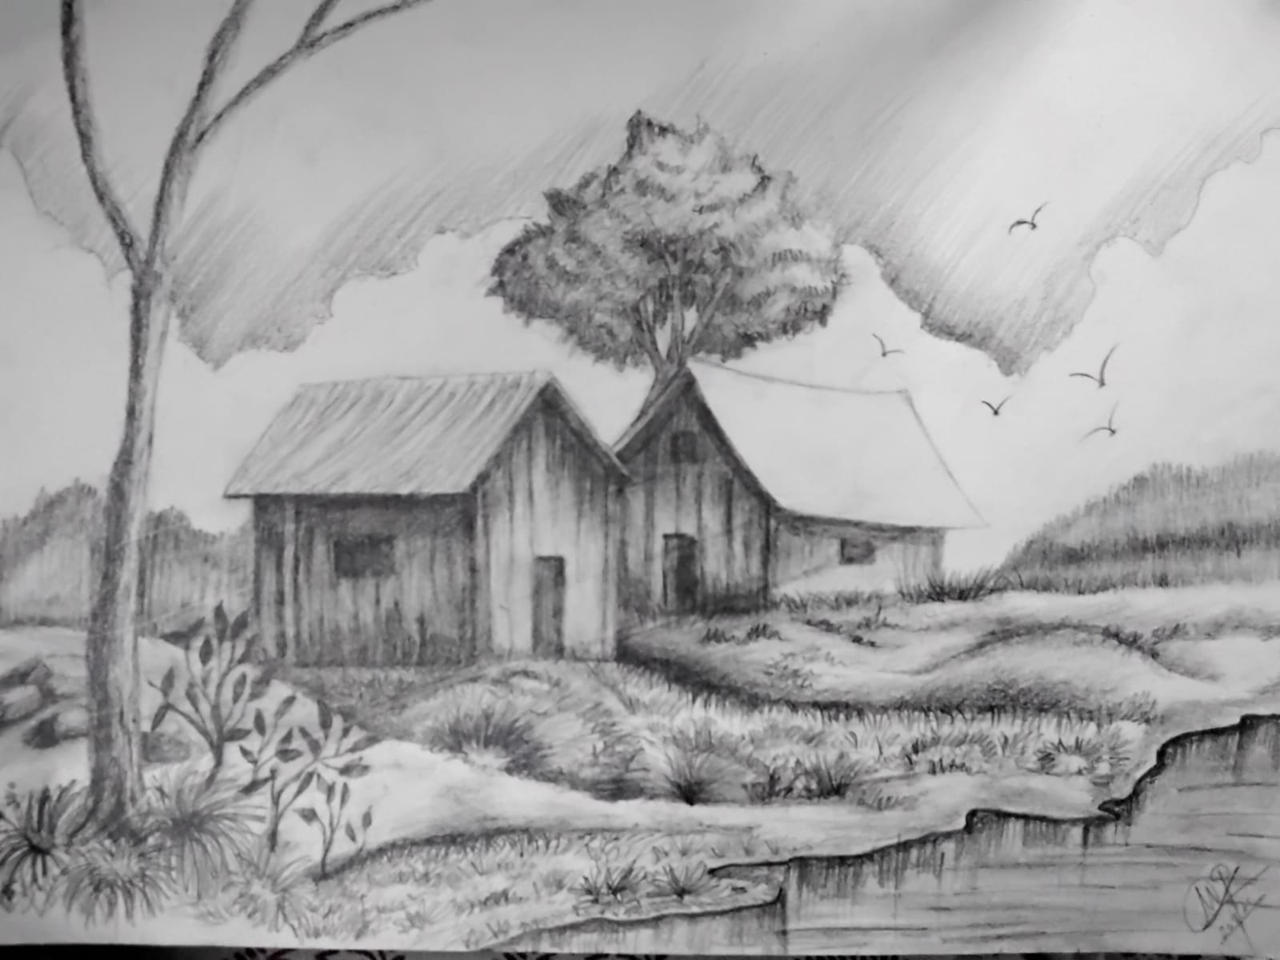 Learn Drawing and Shading A Landscape Art With PENCIL, Pencil Art